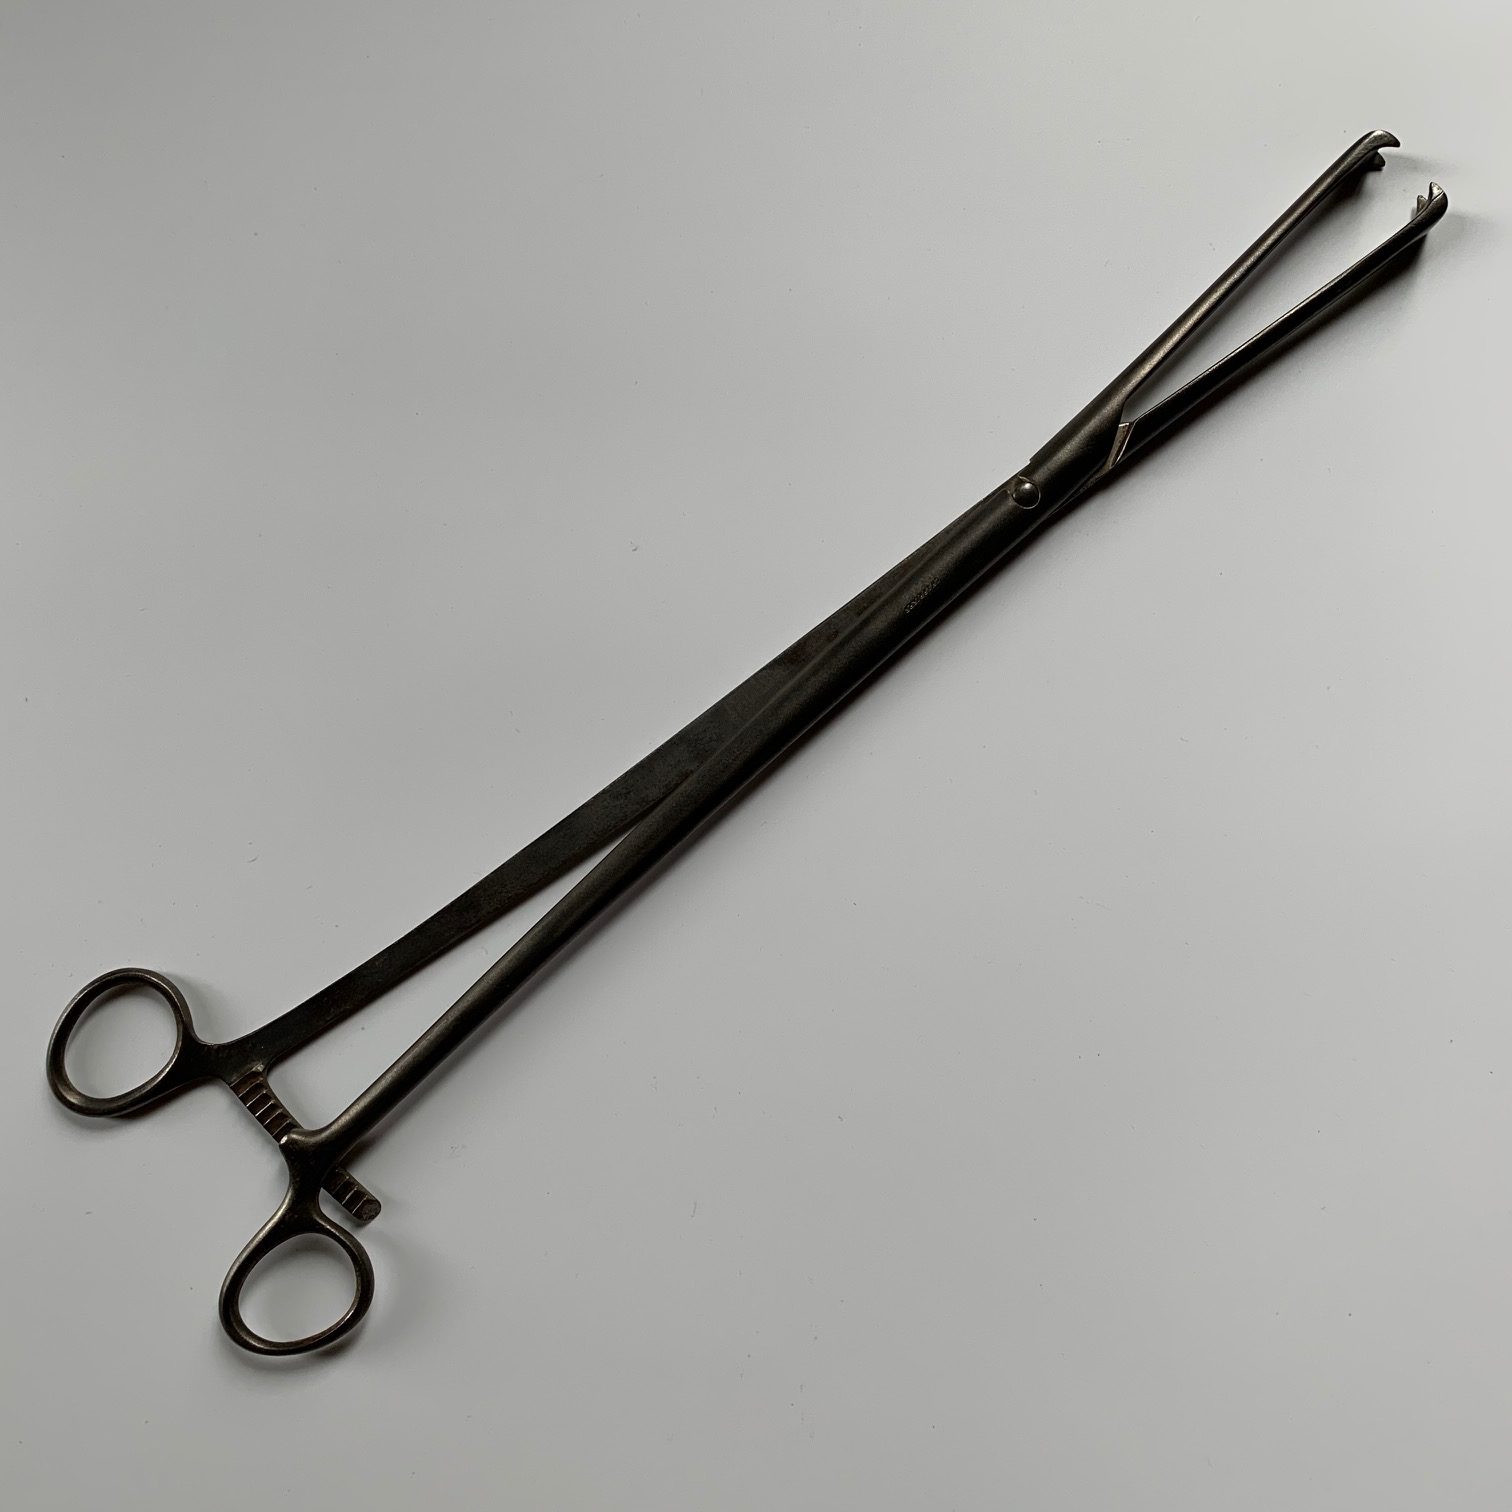 A rare Tire-Tete, obstetrical destructive instrument, by Charriere